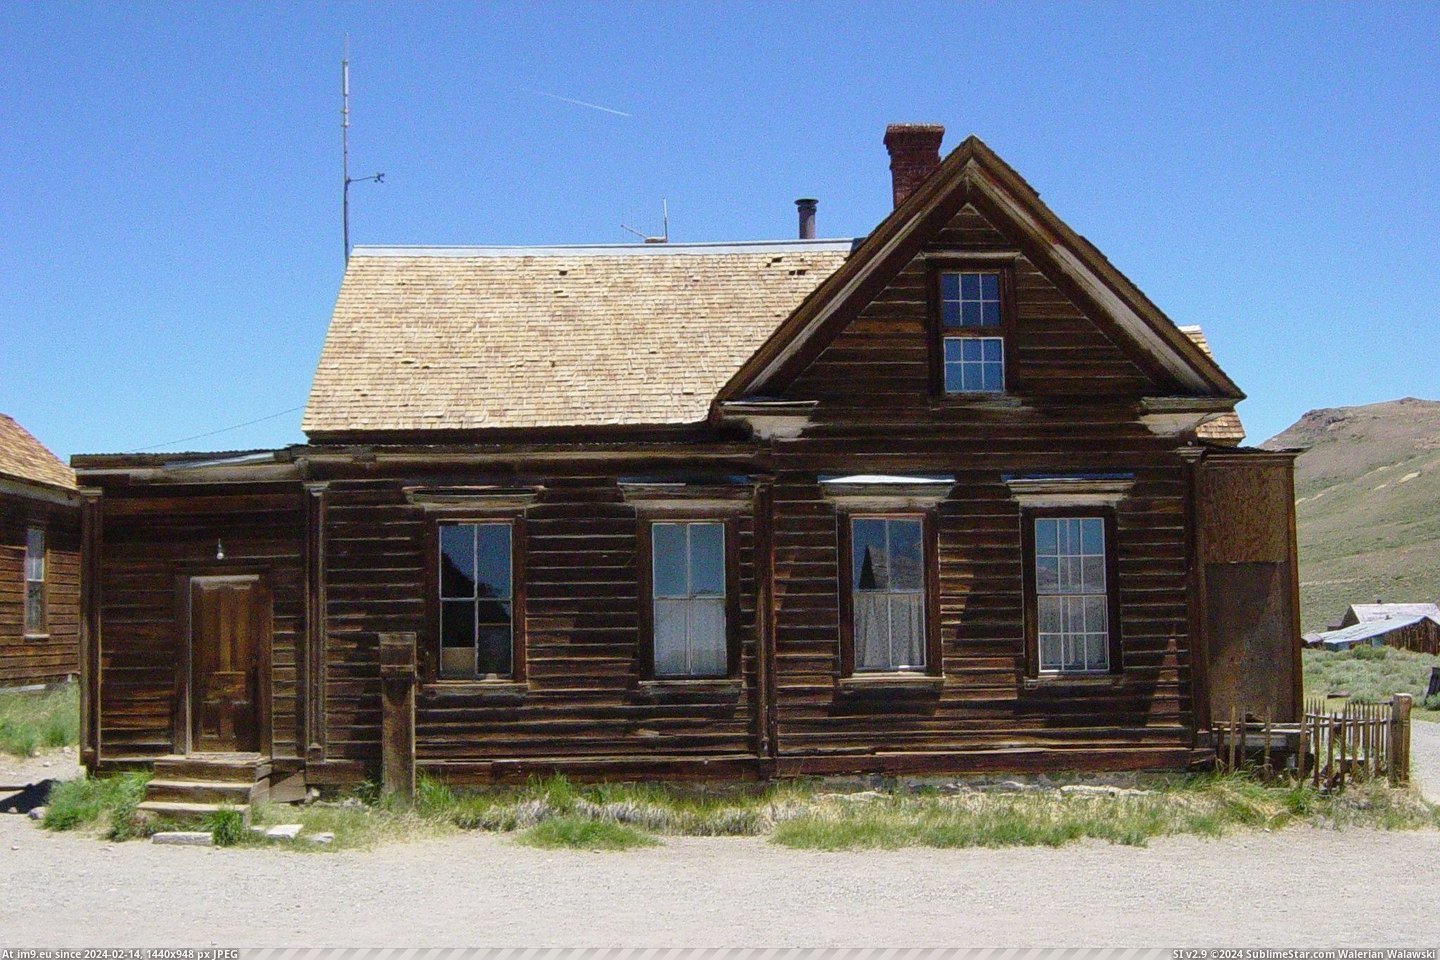 James S. Cain Residence In Bodie, California (in Bodie - a ghost town in Eastern California)